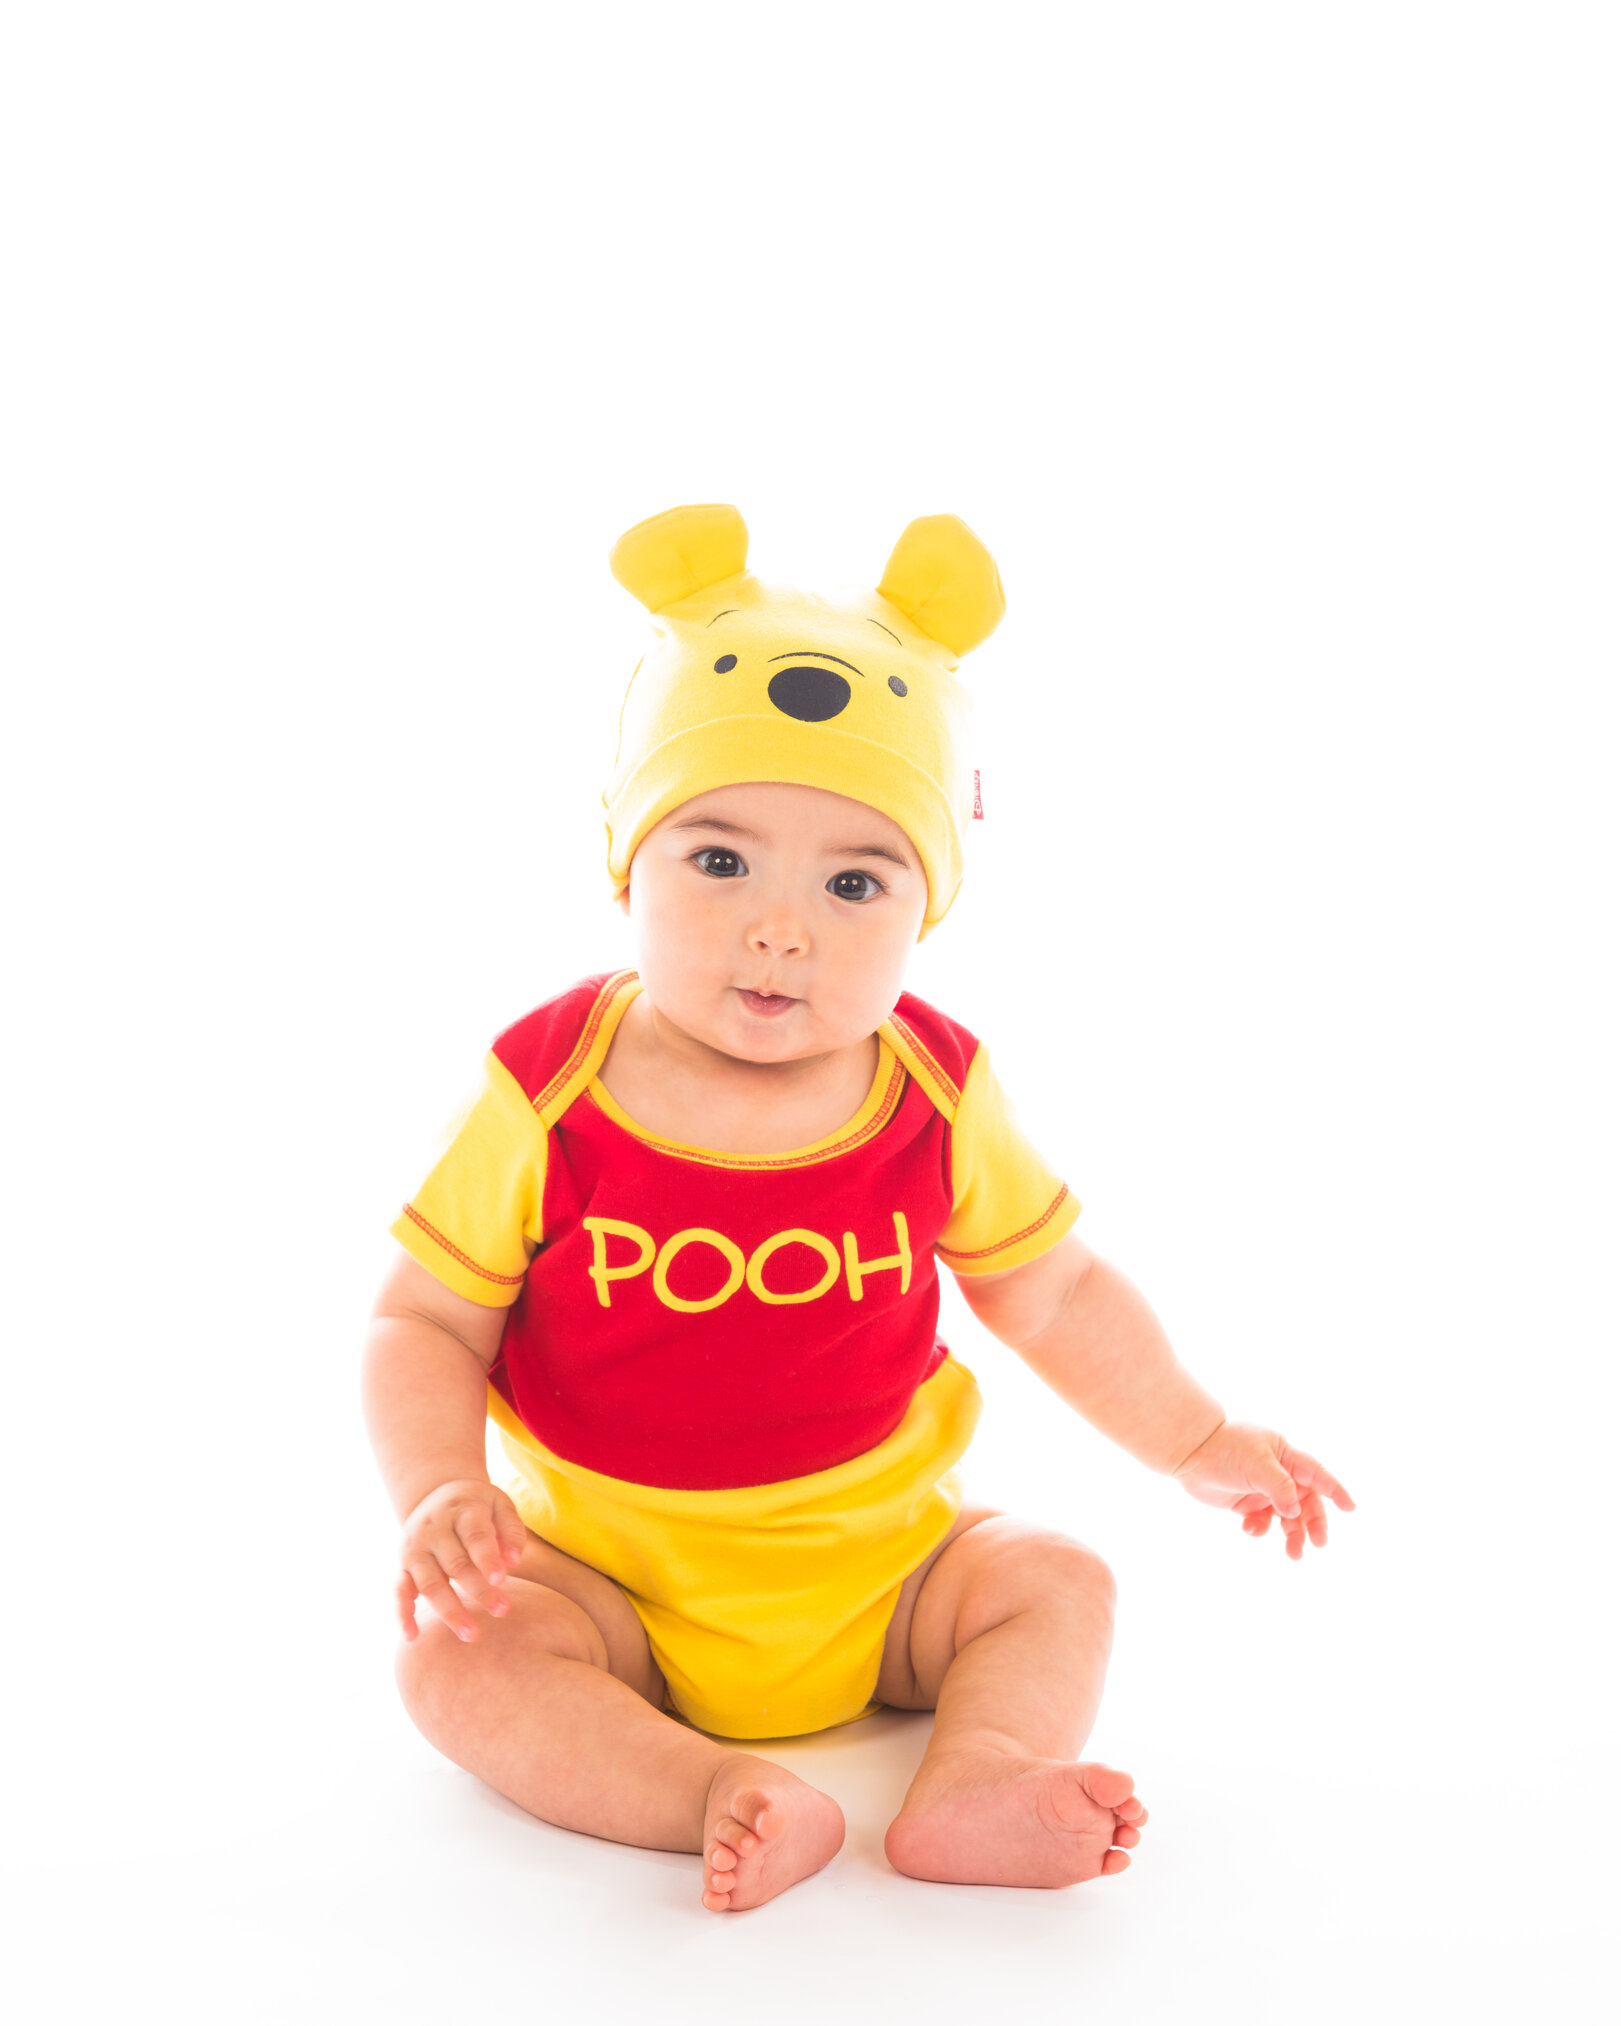 Disney Winnie the Pooh Infant Baby Boys Bodysuit and Hat Set Newborn to Infant - image 3 of 5